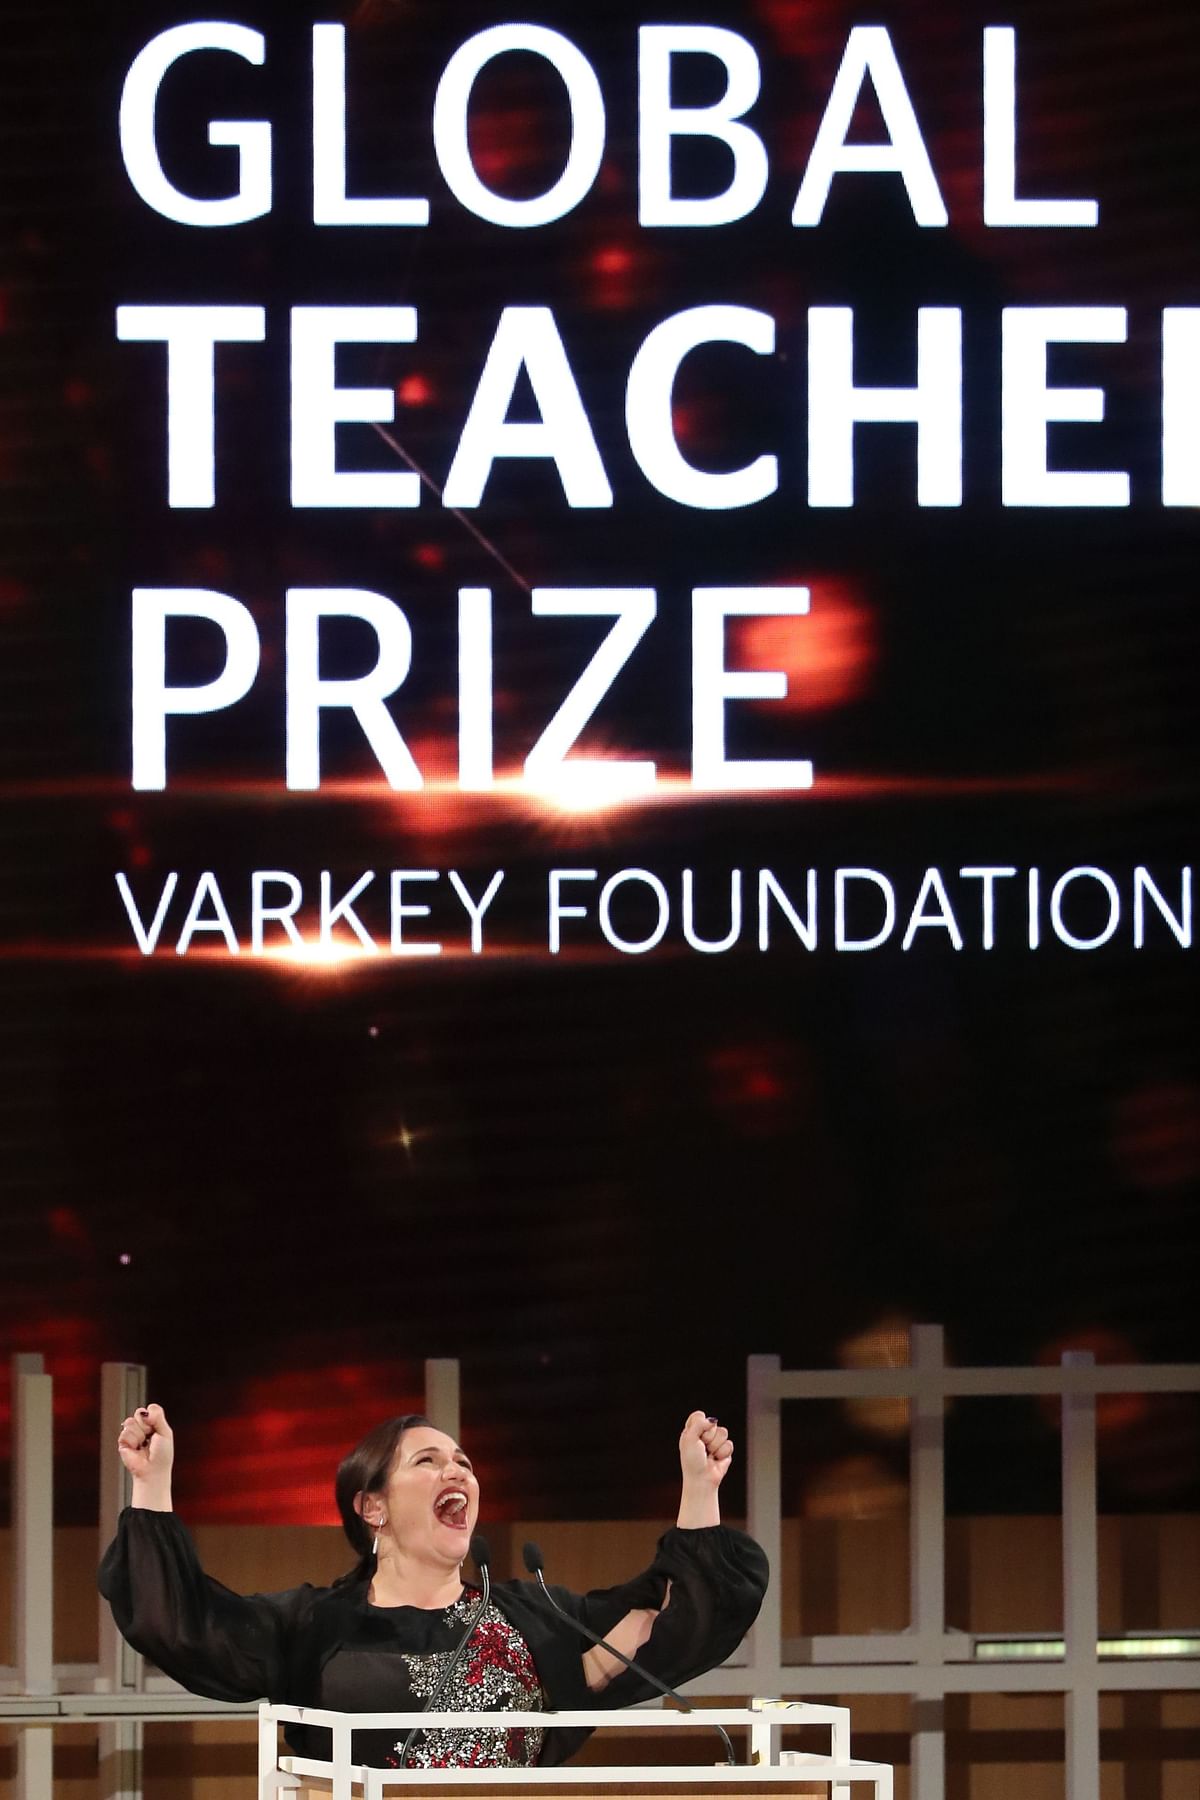 British teacher Andria Zafirakou gives a speech after receiving the `Global Teacher Prize` during an award ceremony in Dubai on 18 March, 2018. Photo: AFP